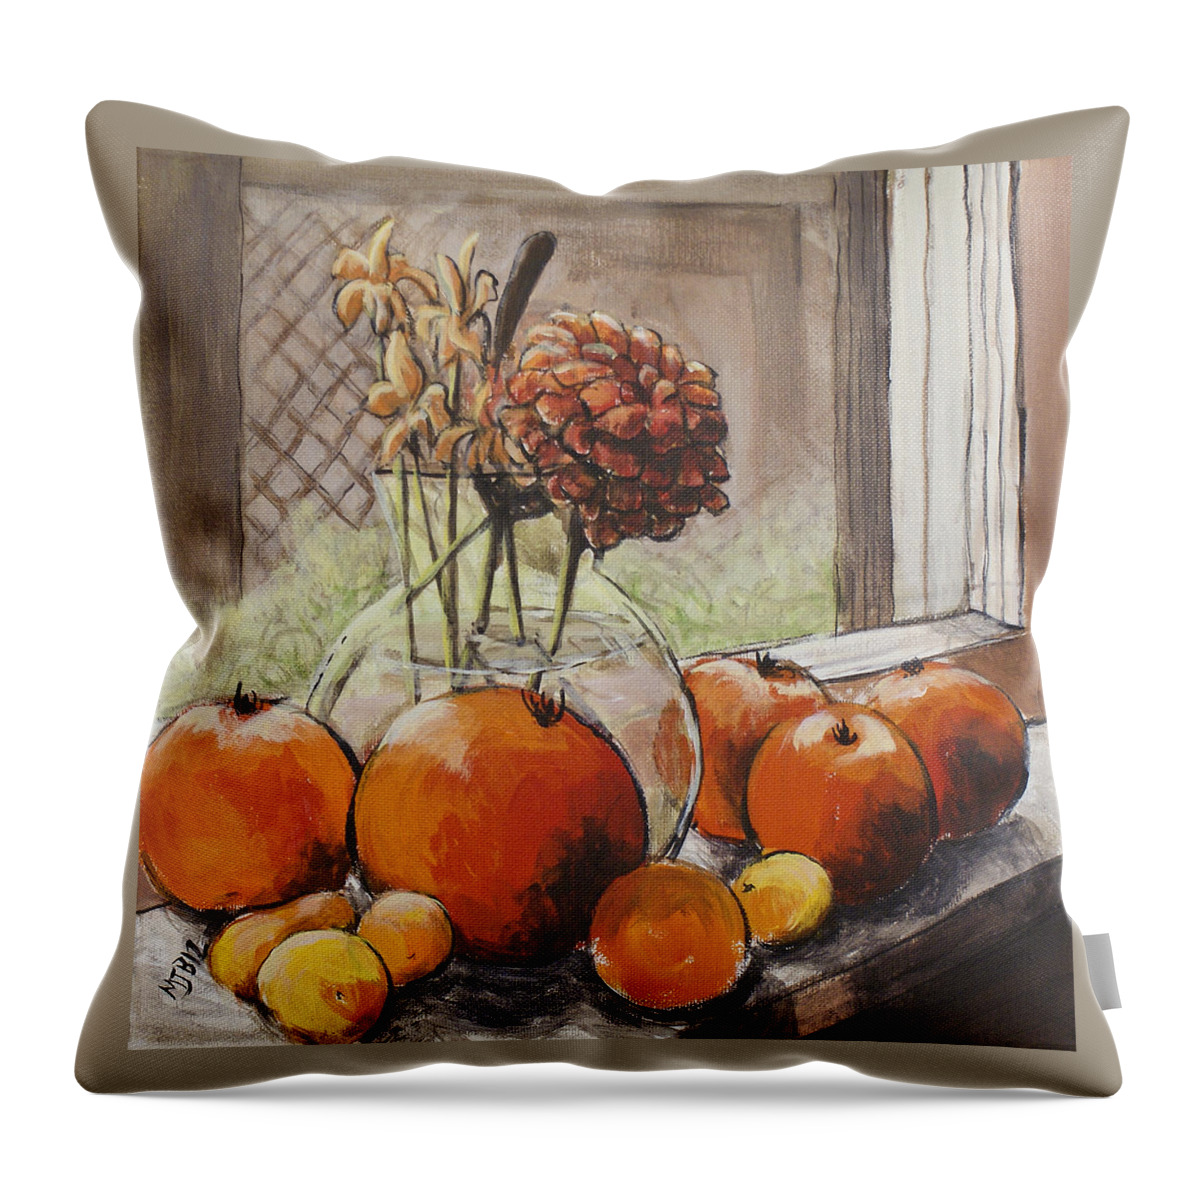 Tomatoes Throw Pillow featuring the painting Tomatoes In A Sunny Window by Michael Beckett